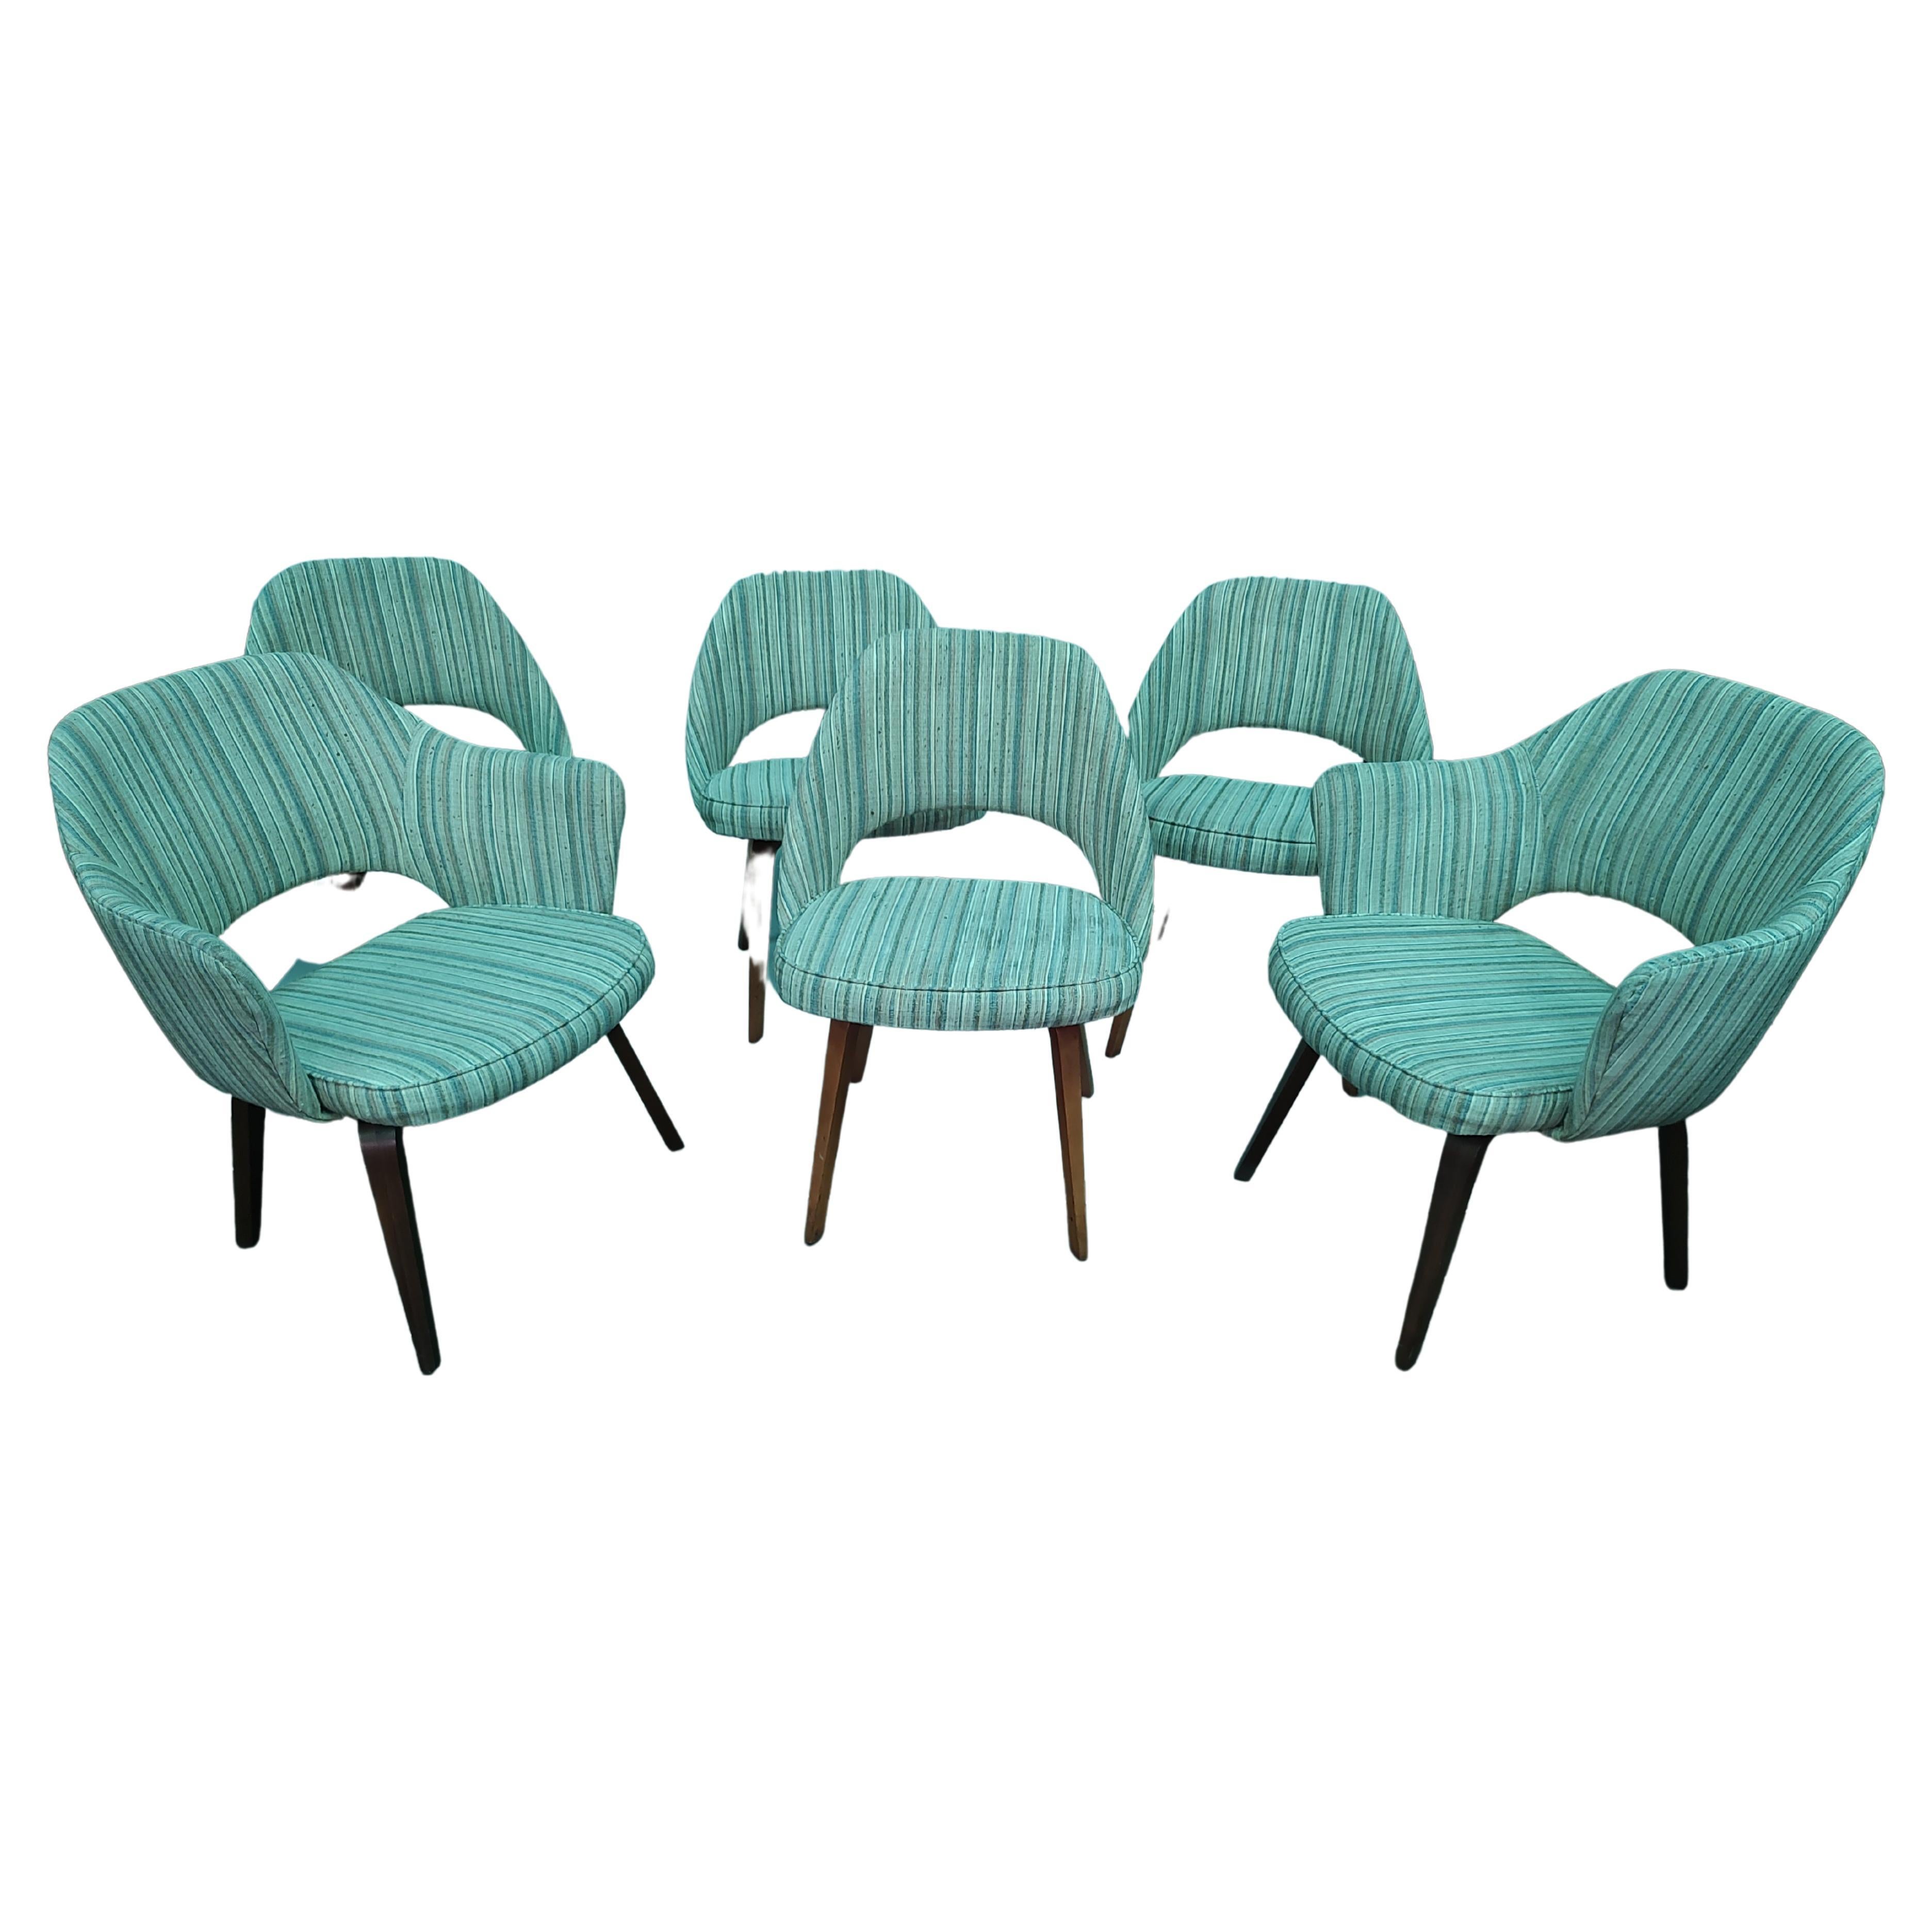 Fabulous set of six executive chairs by Eero Saarinen for Knoll industries with wooden legs. Please understand the photos have a green tint to them, nothing green about these chairs. Beautiful striped fabric, see the additional photos, a little SS